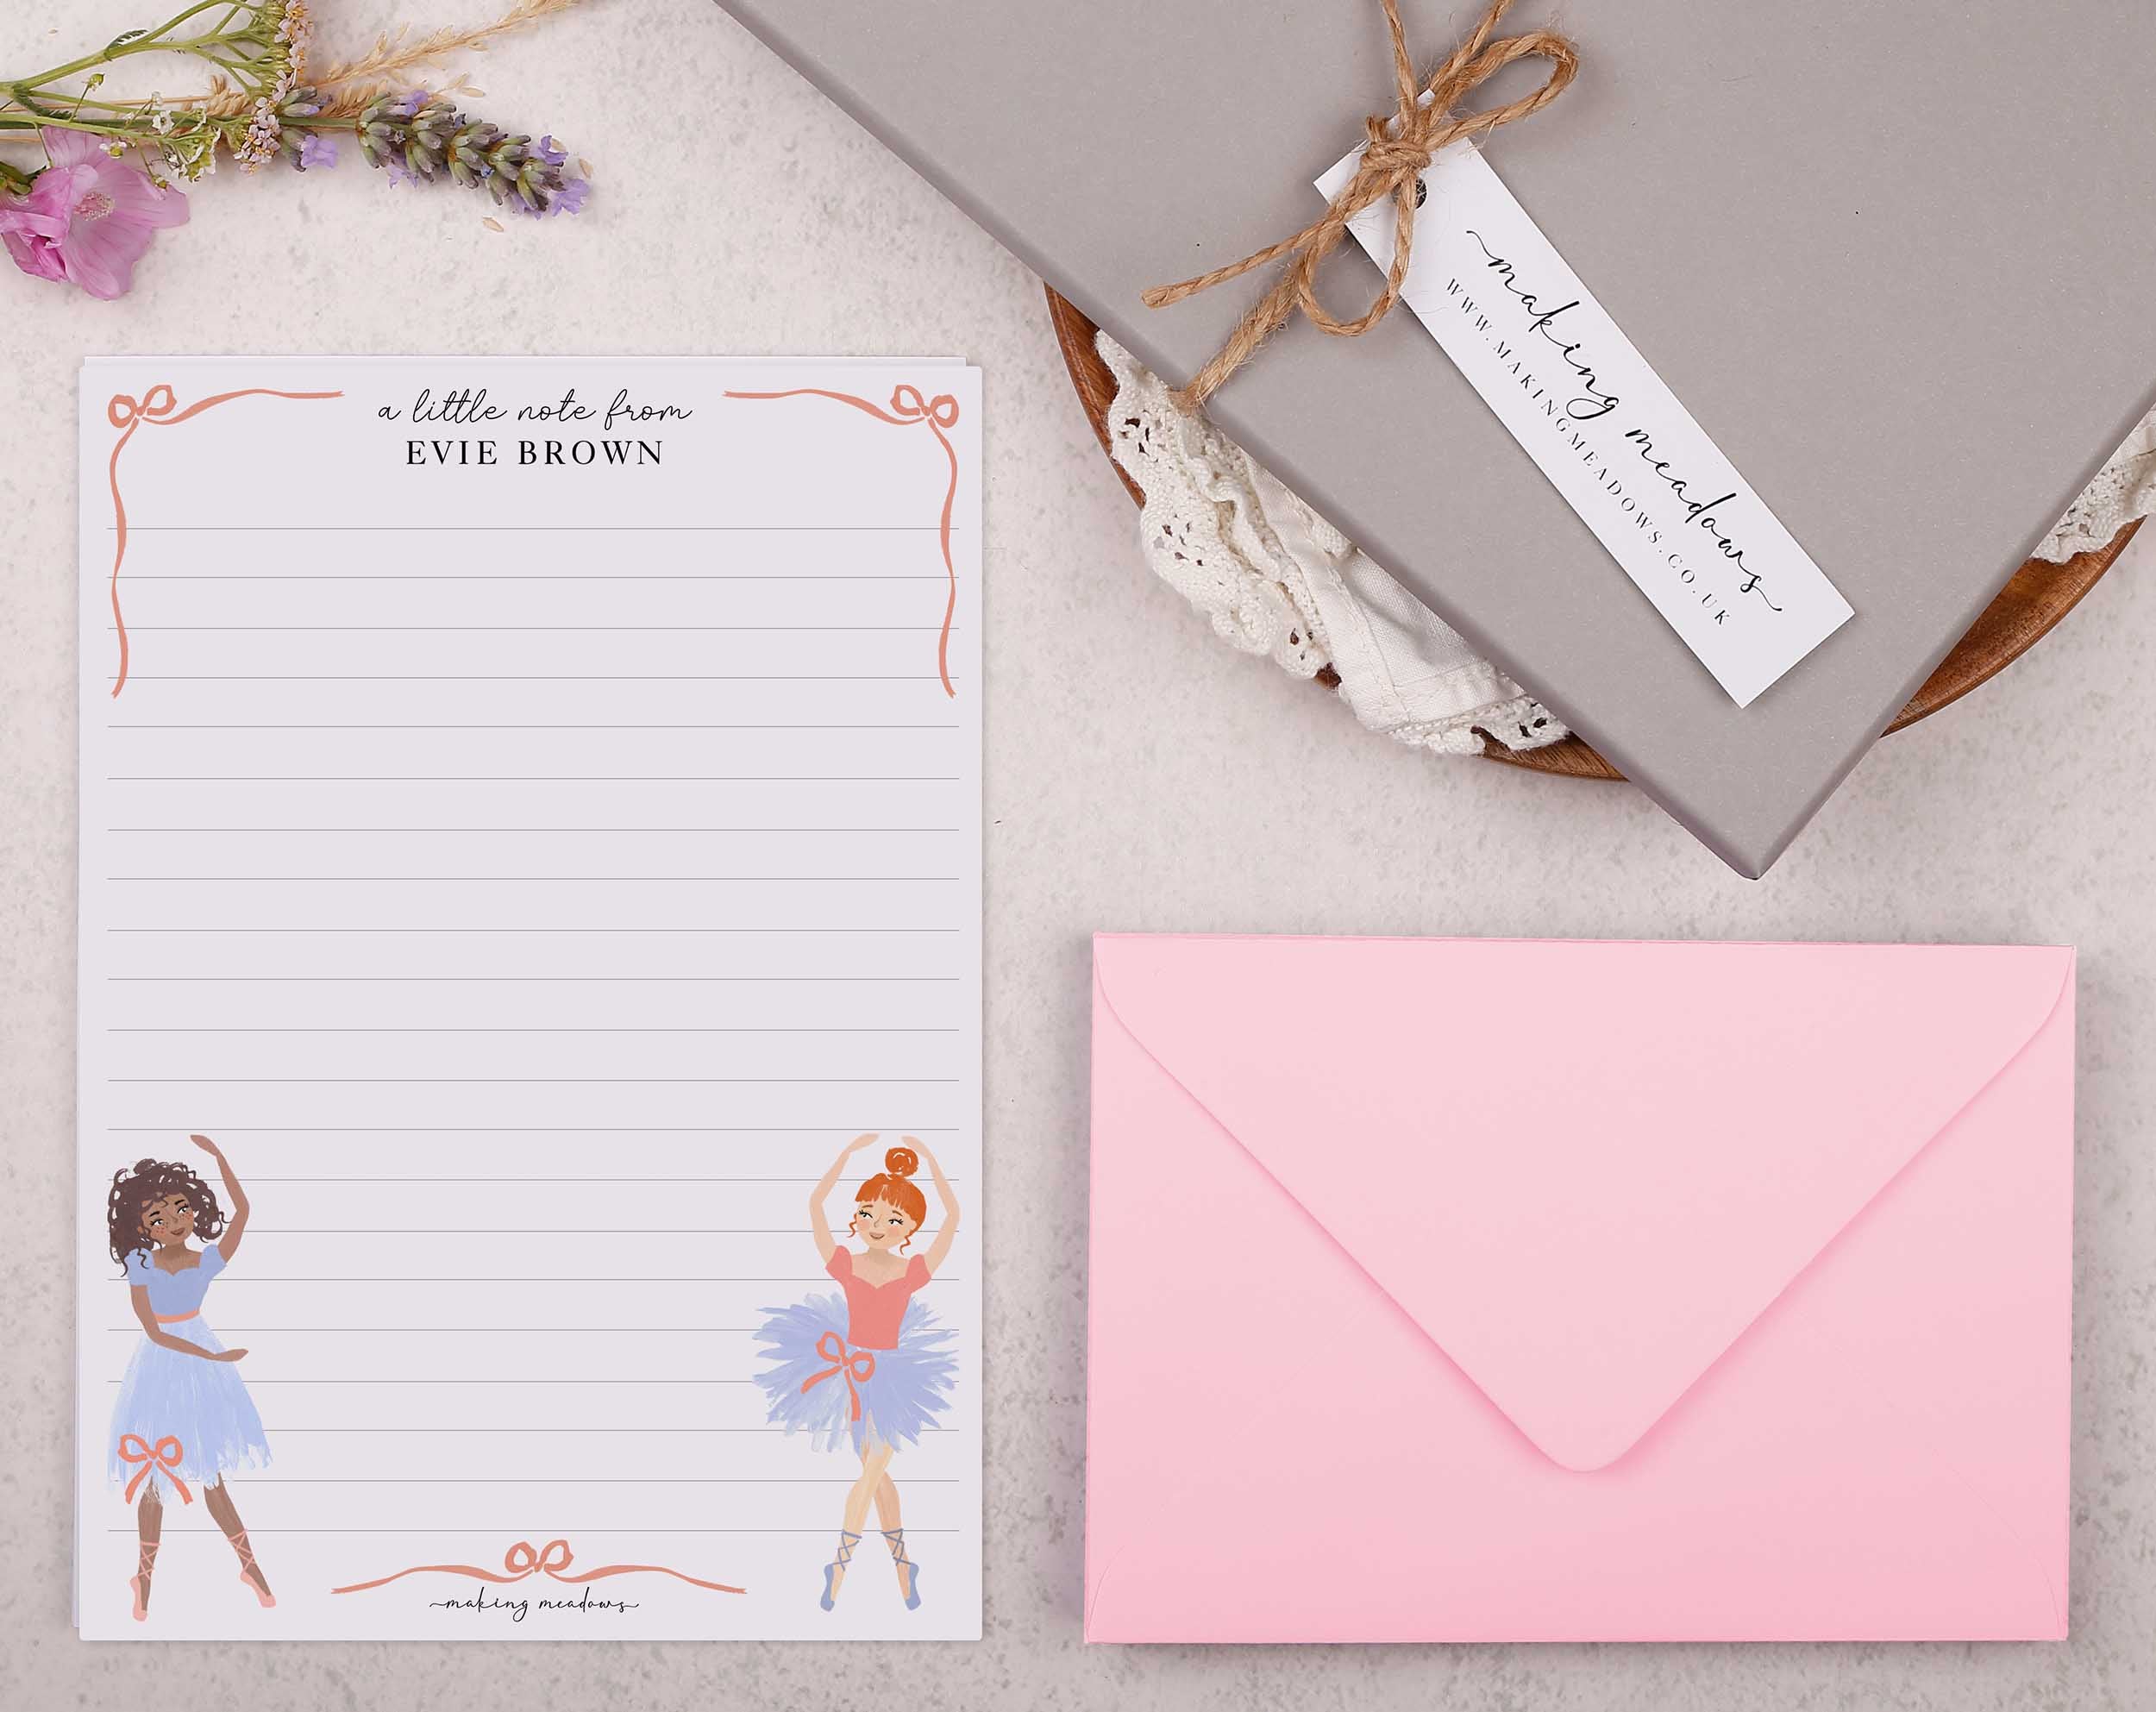 Premium personalised A5 letter writing paper set with ballet dancers dancing and ribbons curling around the edge.